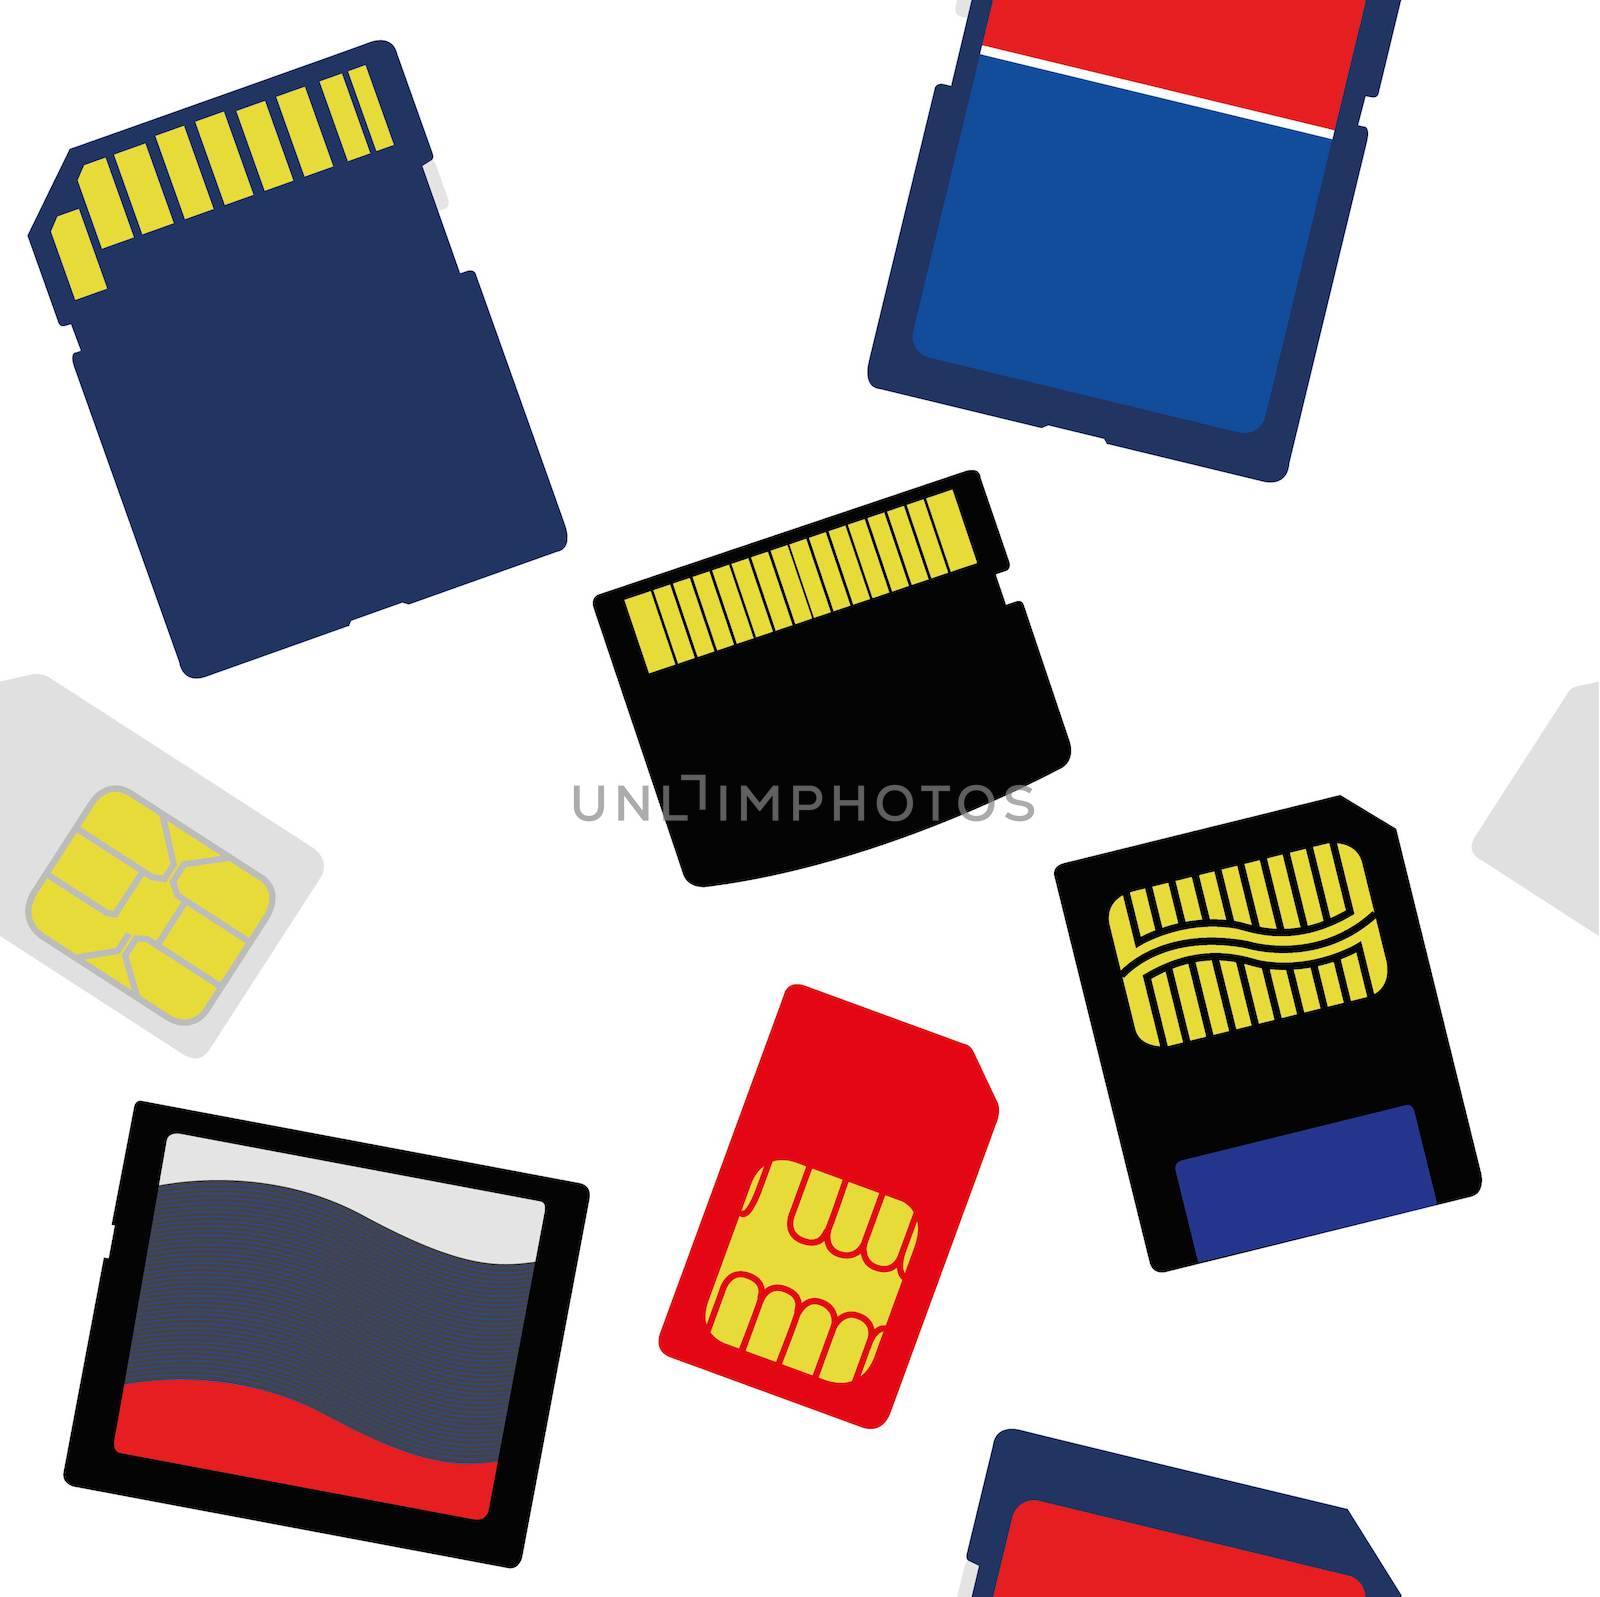 An Illustration of Selection of Memory and SIM Cards